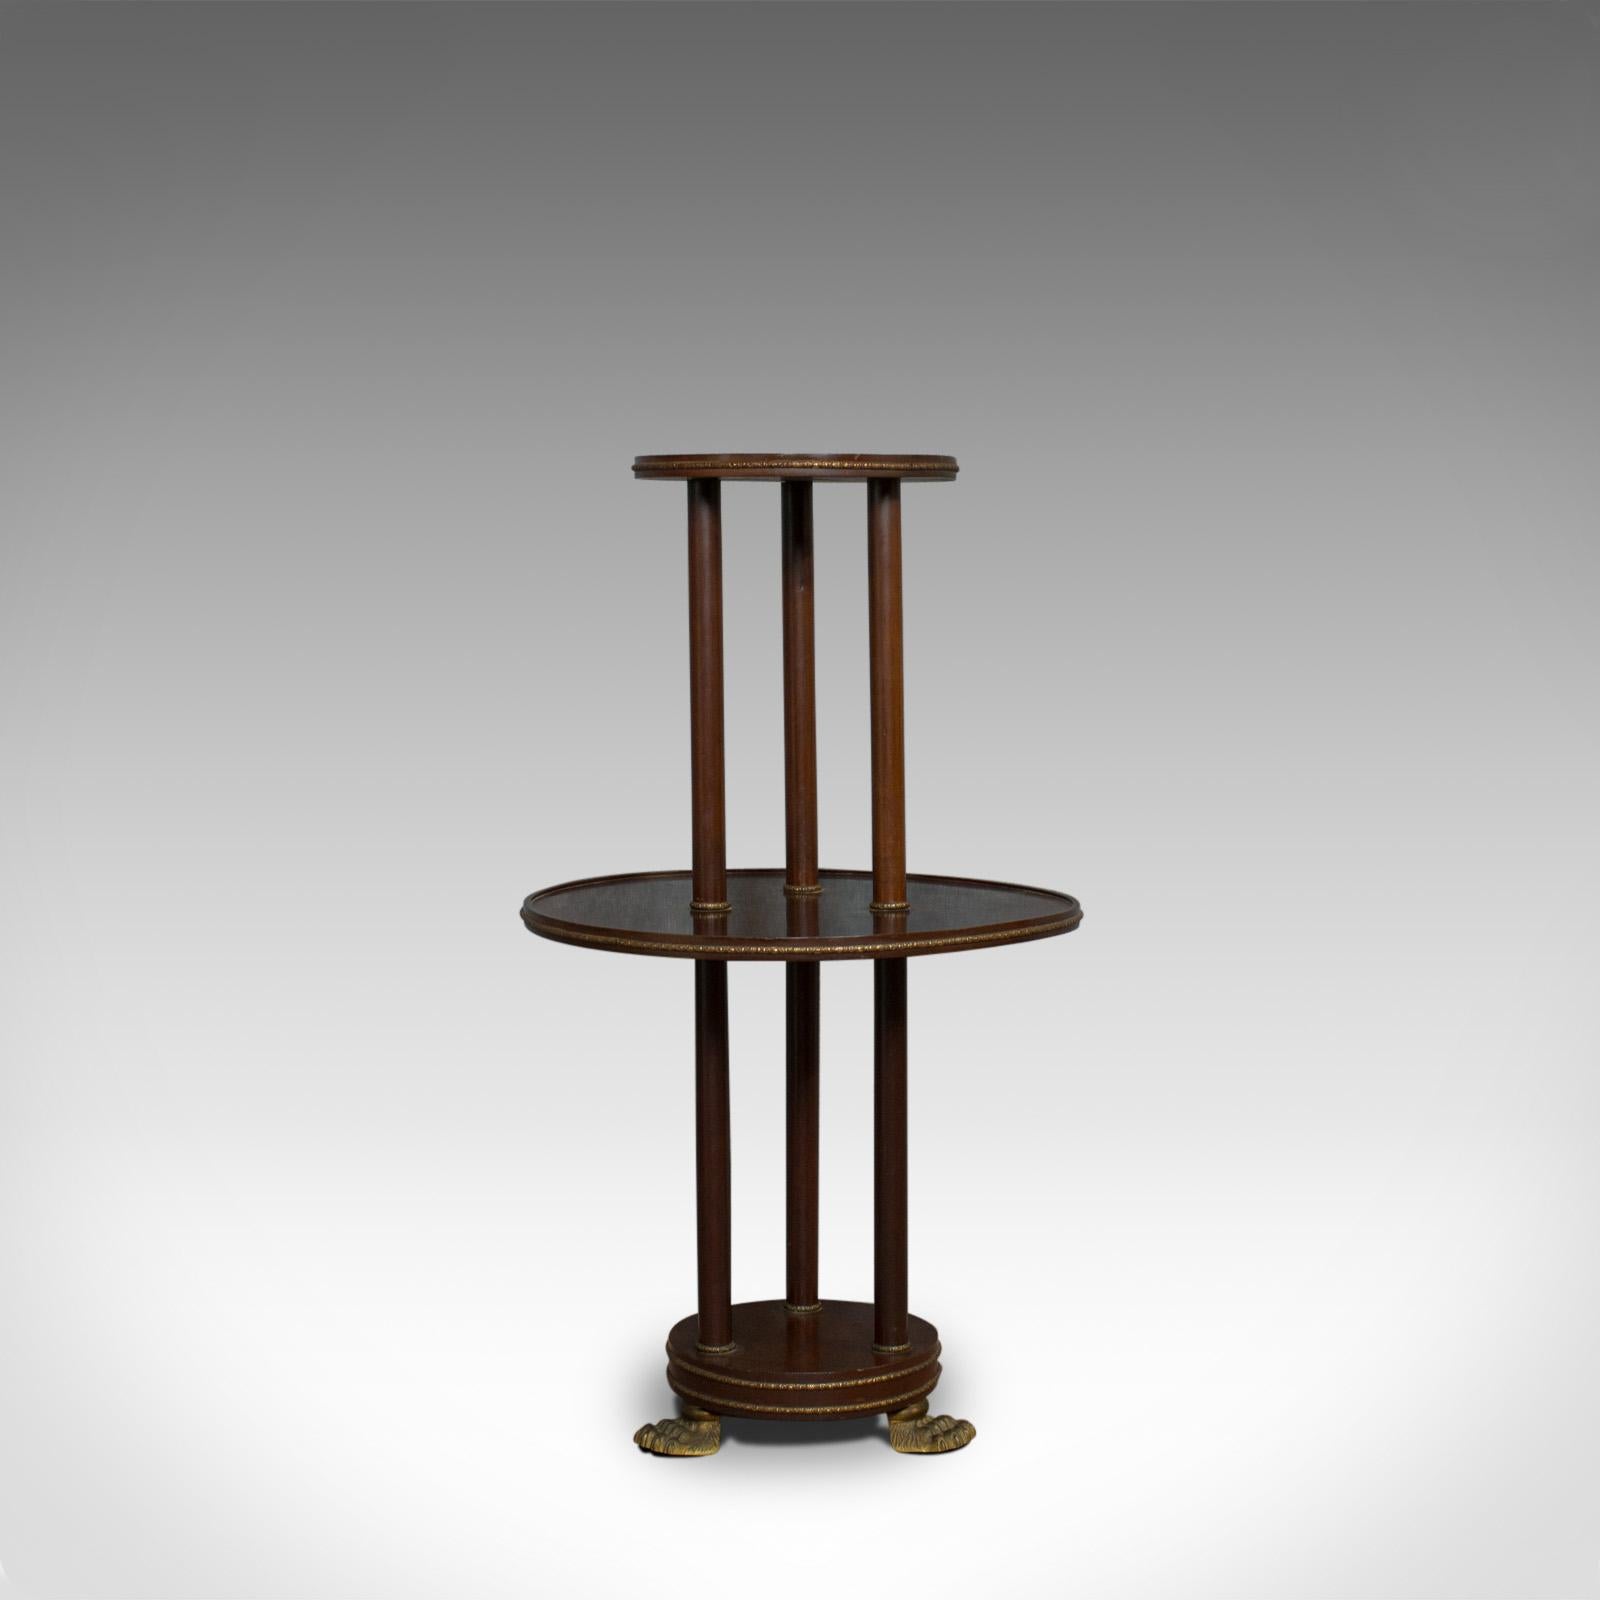 This is an antique dumb waiter. An English, Victorian, mahogany tiered table displaying Empire styling and dating to the late 19th century, circa 1880.

Rich mahogany in russet hues display a desirable aged patina
Detailed gilt metal banding in